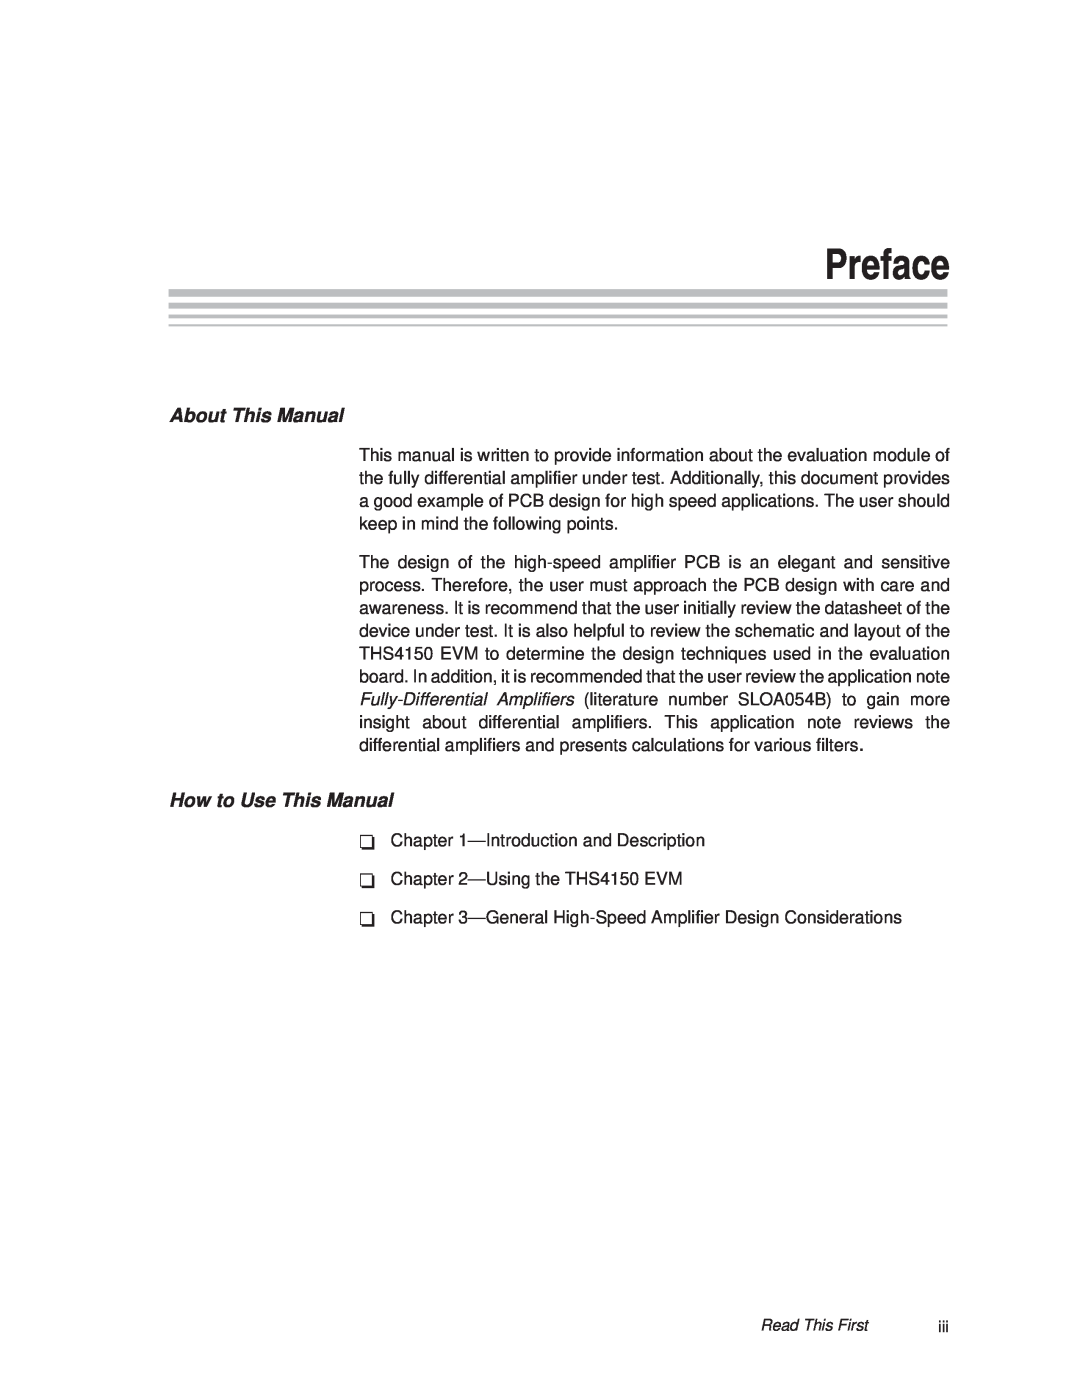 Texas Instruments THS4150 manual Preface, About This Manual, How to Use This Manual 